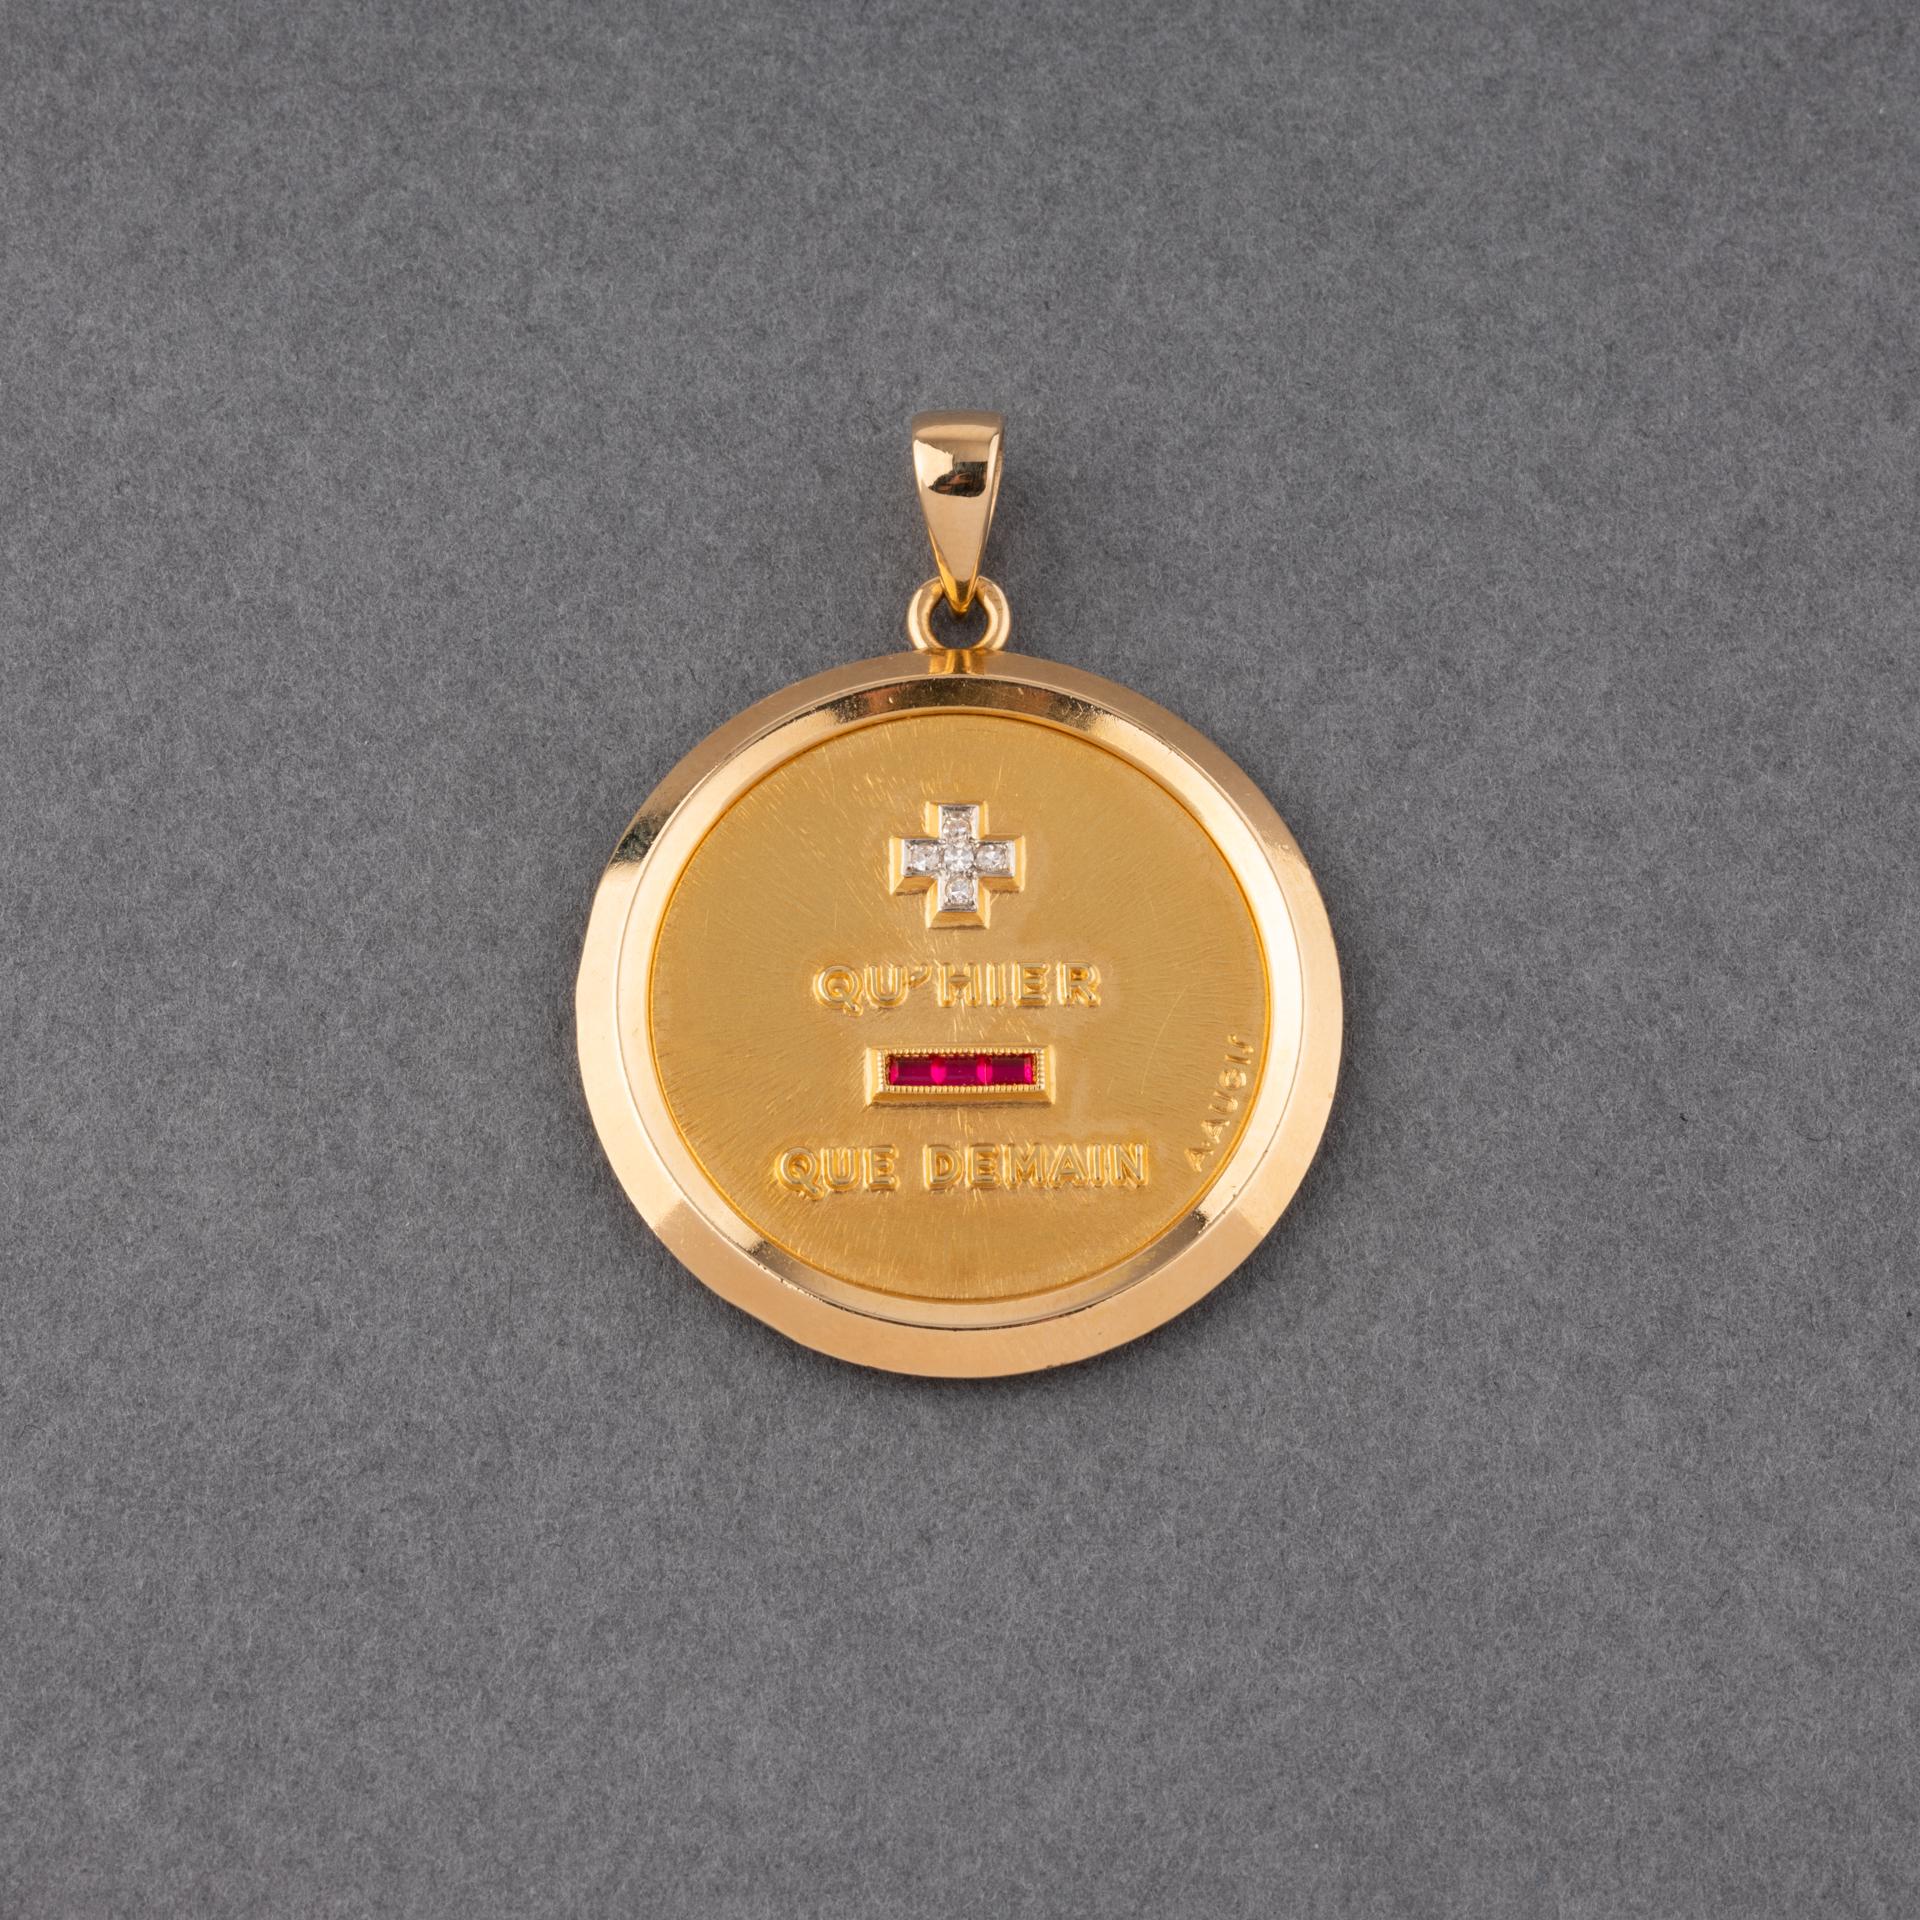 A very lovely vintage medal, made by French house AUGIS. 
It is an unusual model, they are generally smaller and lighter.
Made in yellow gold 18k, set with diamonds and red stones.
Dimensions: 33 mm diameter. 
Weight: 19.20 grams